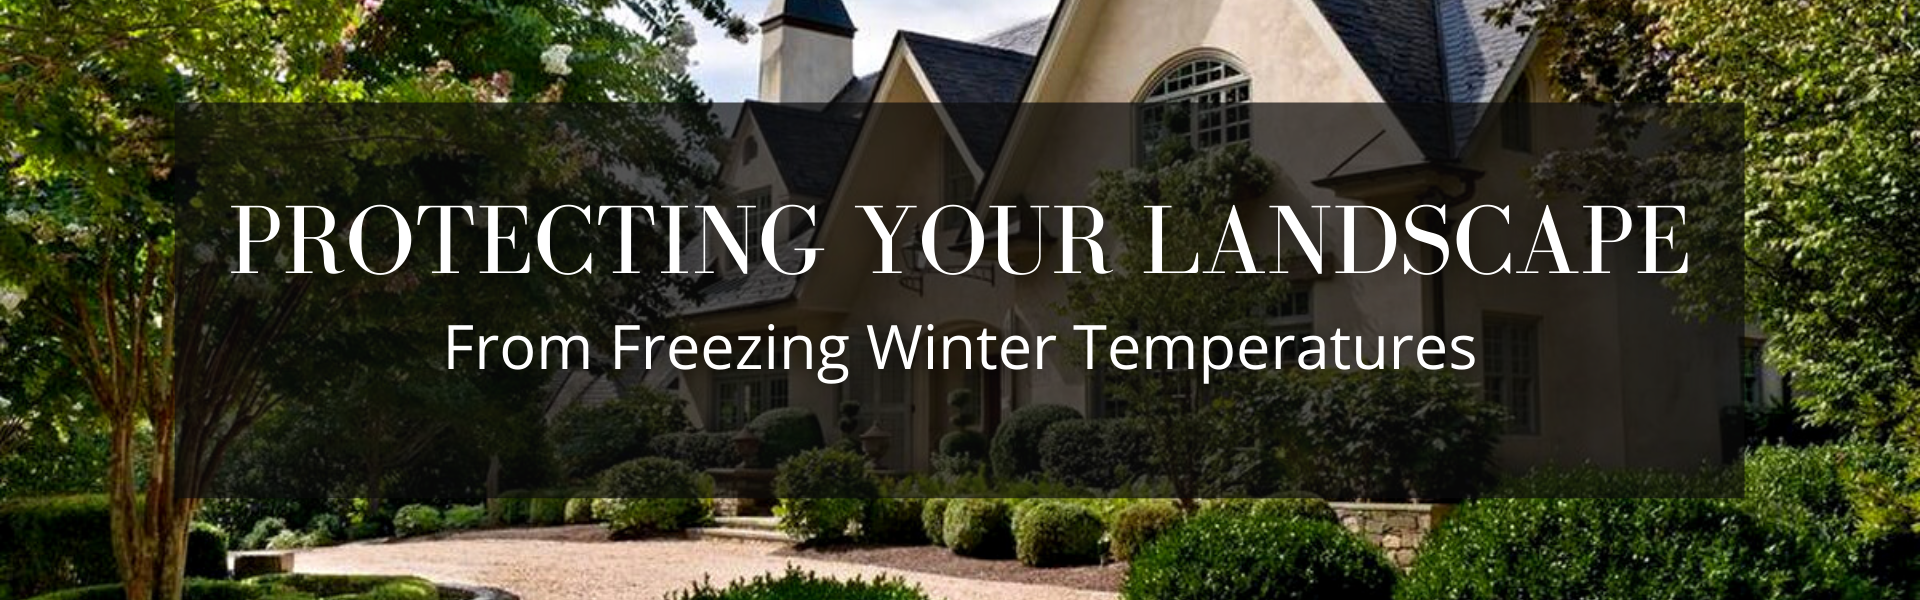 Protecting your landscape from freezing Winter Temperatures